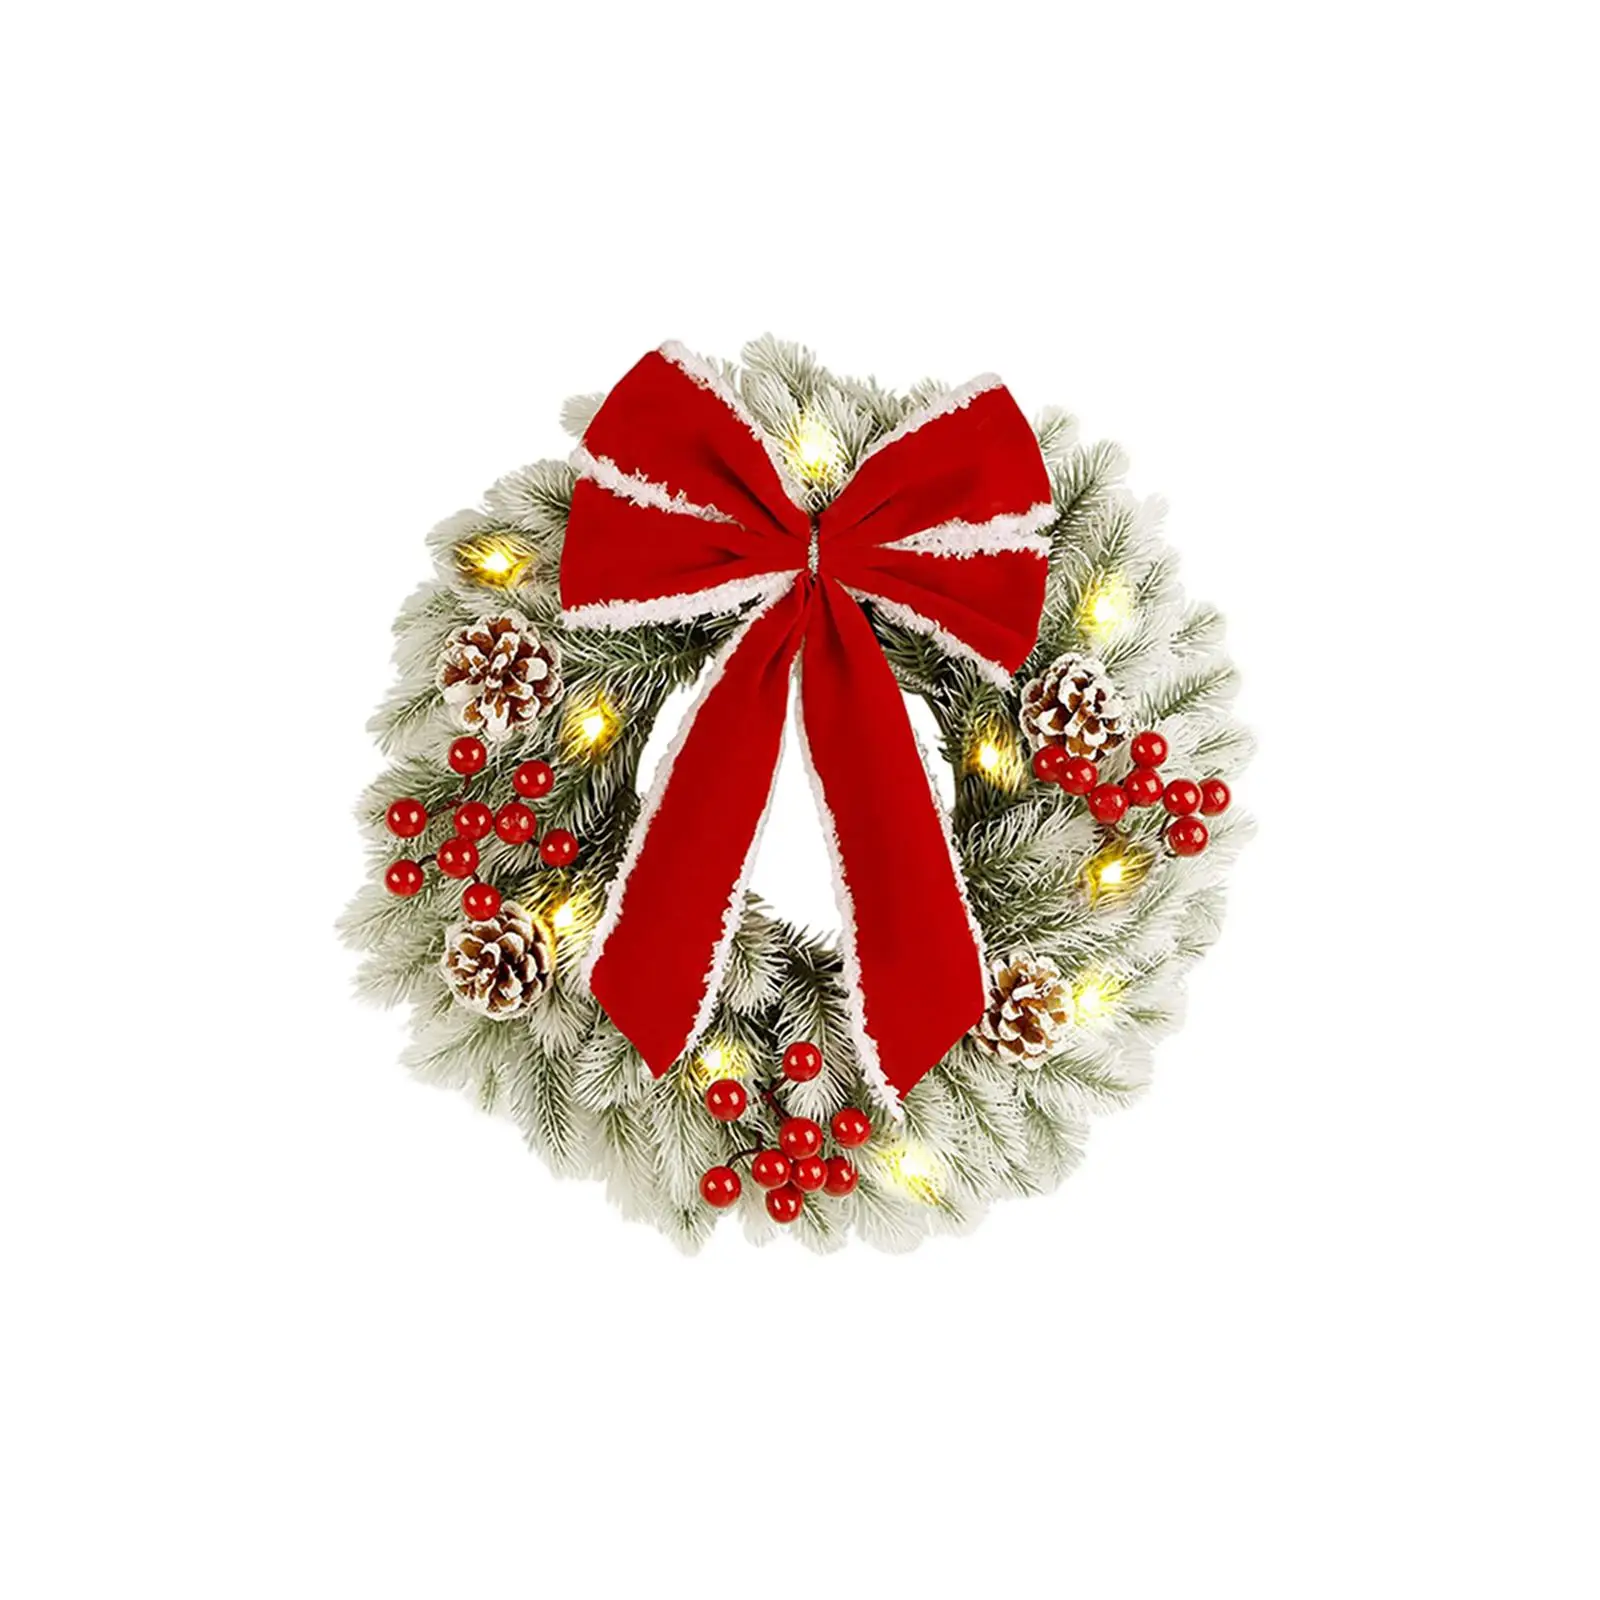 Christmas Wreath Party Festival Holiday Garland Hanging Artificial Decoration for Office Indoor Outdoor Home Party Ornament